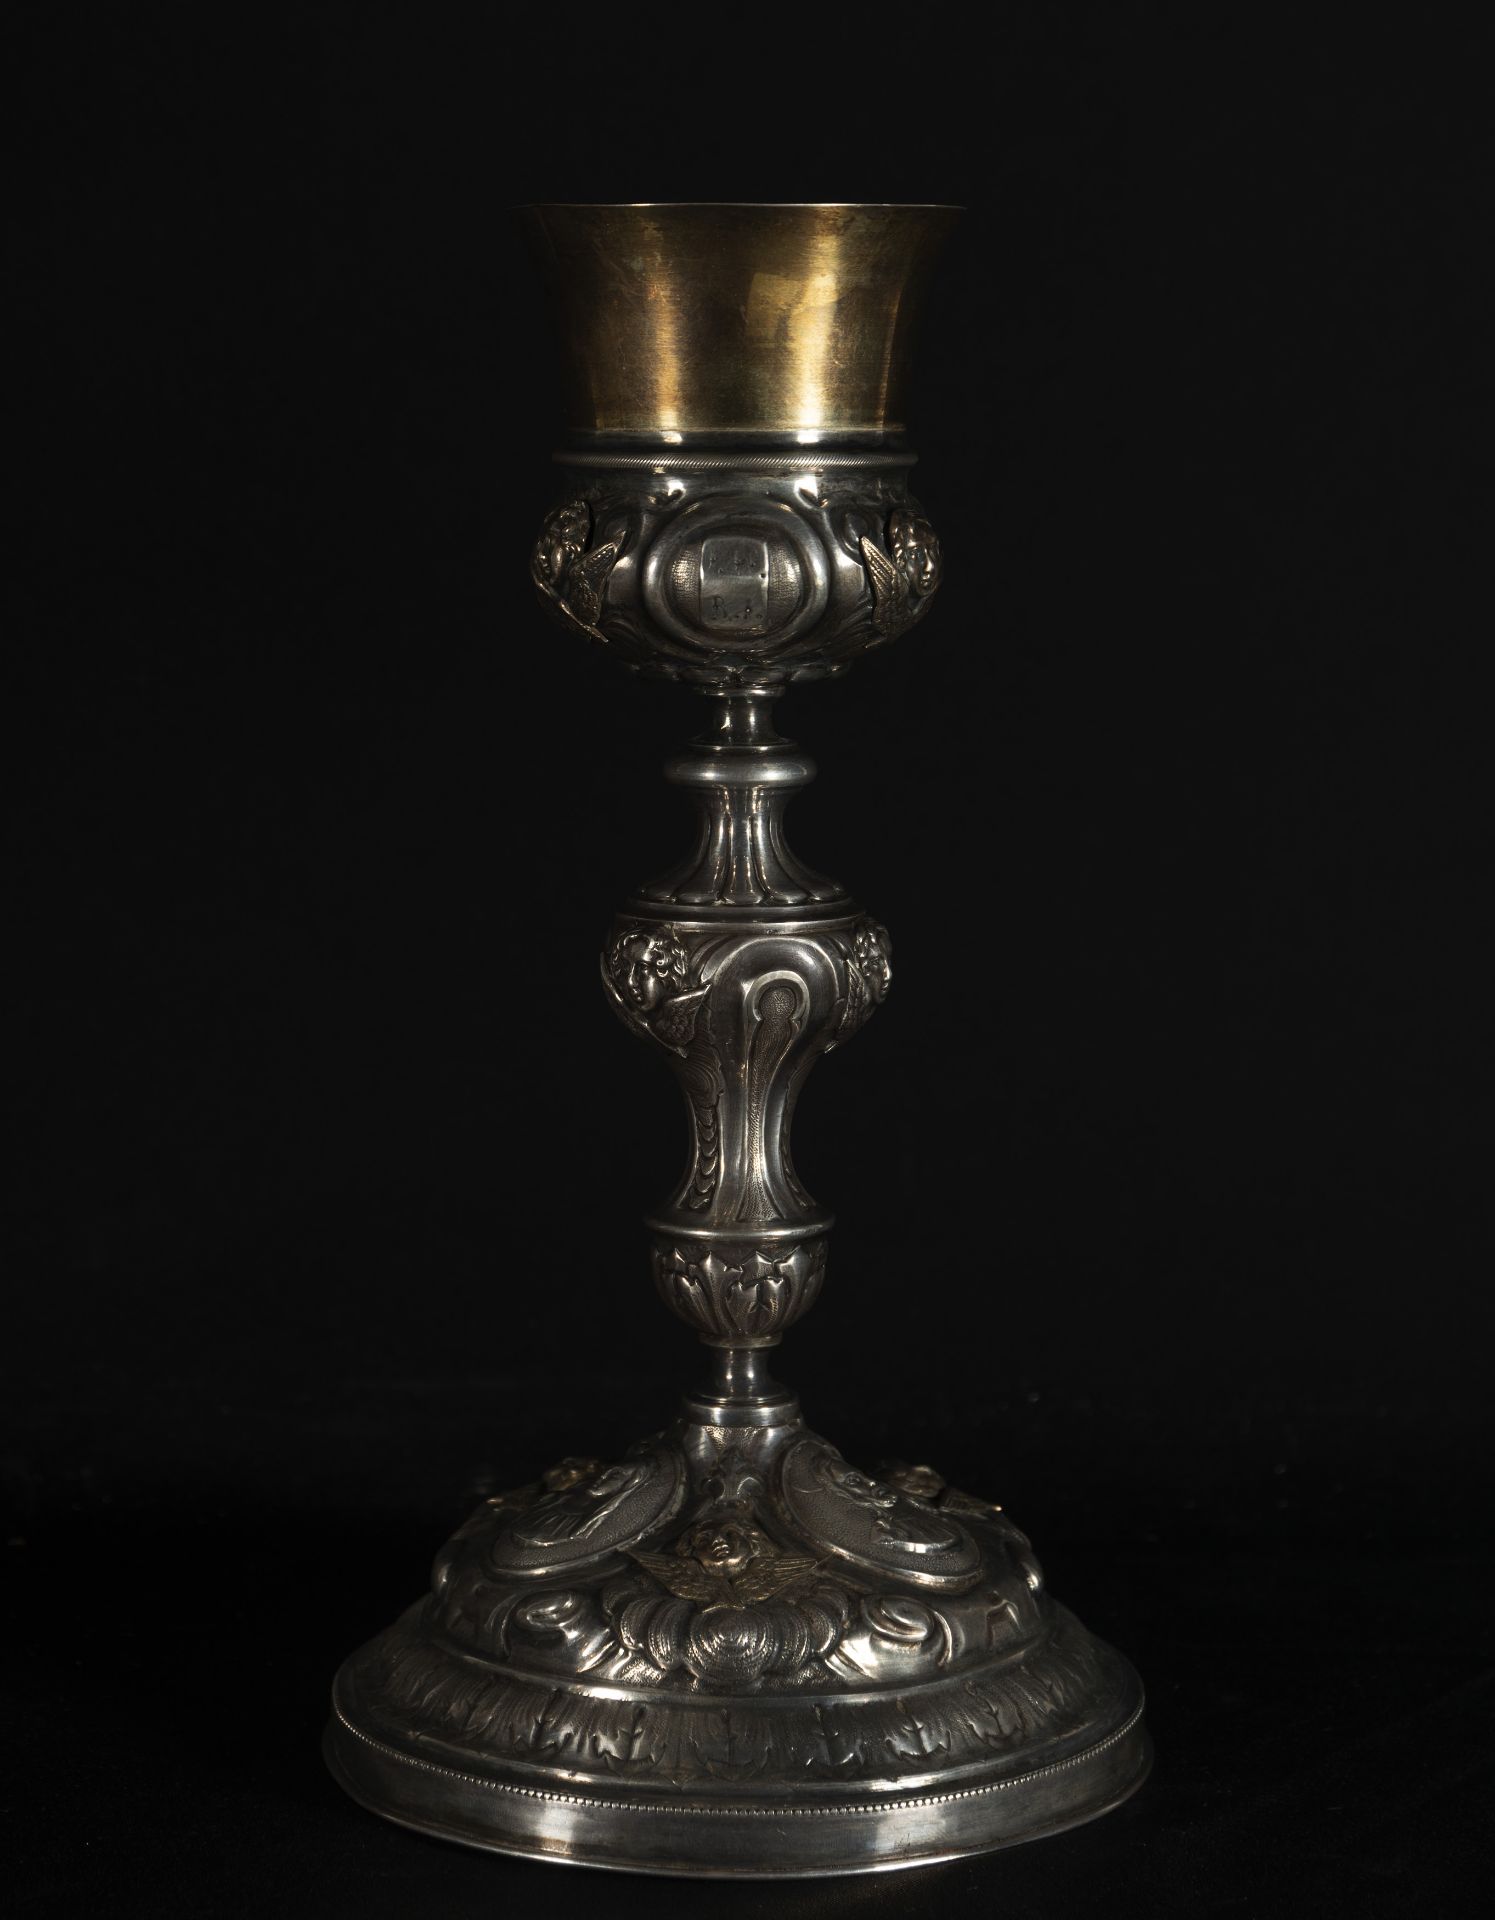 Goblet in 925 Sterling silver and Vermeil, hallmarks from Barcelona and Platero Casas marks, 19th ce - Image 2 of 6